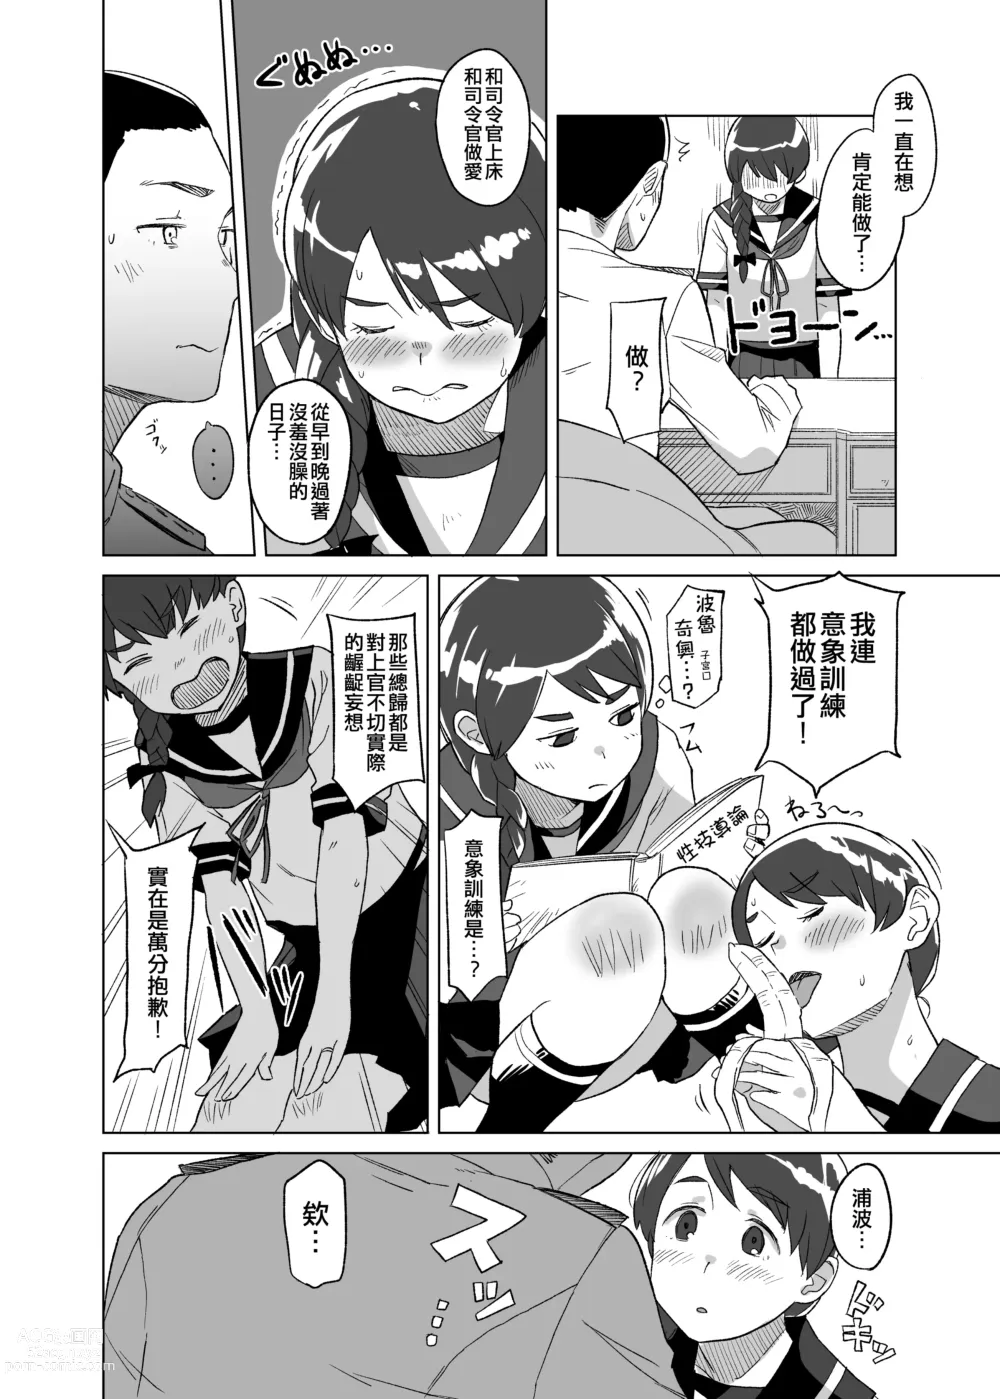 Page 6 of doujinshi Ding Dong